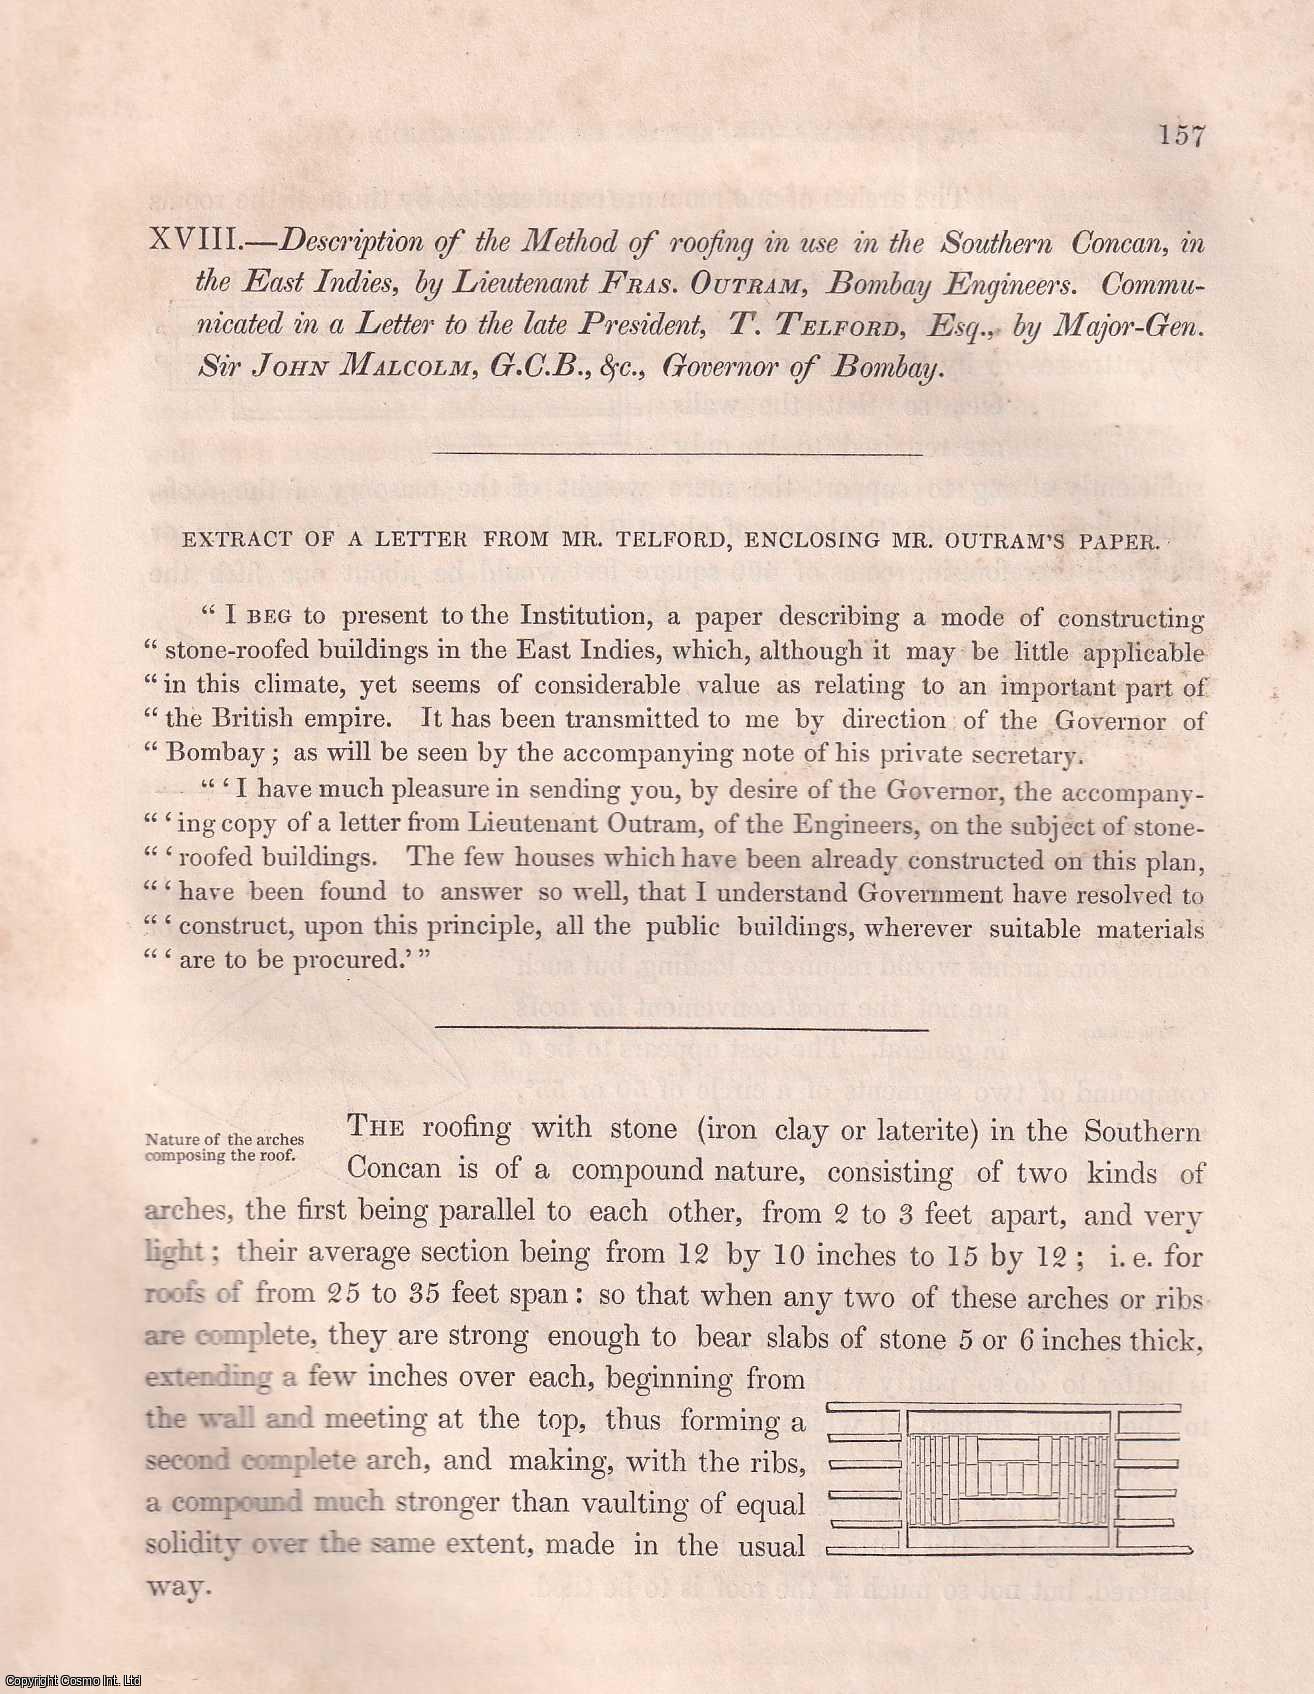 Major-Gen. Sir John Malcolm, G.C.B. & Governor of Bombay - Description of The Method of Roofing in Use in The Southern Concan, in The East Indies, by Lieutenant Fras. Outram, Bombay Engineers. Communicated in a Letter to The Late President, Thomas Telford. An article from the Institution of Civil Engineers, 1836.